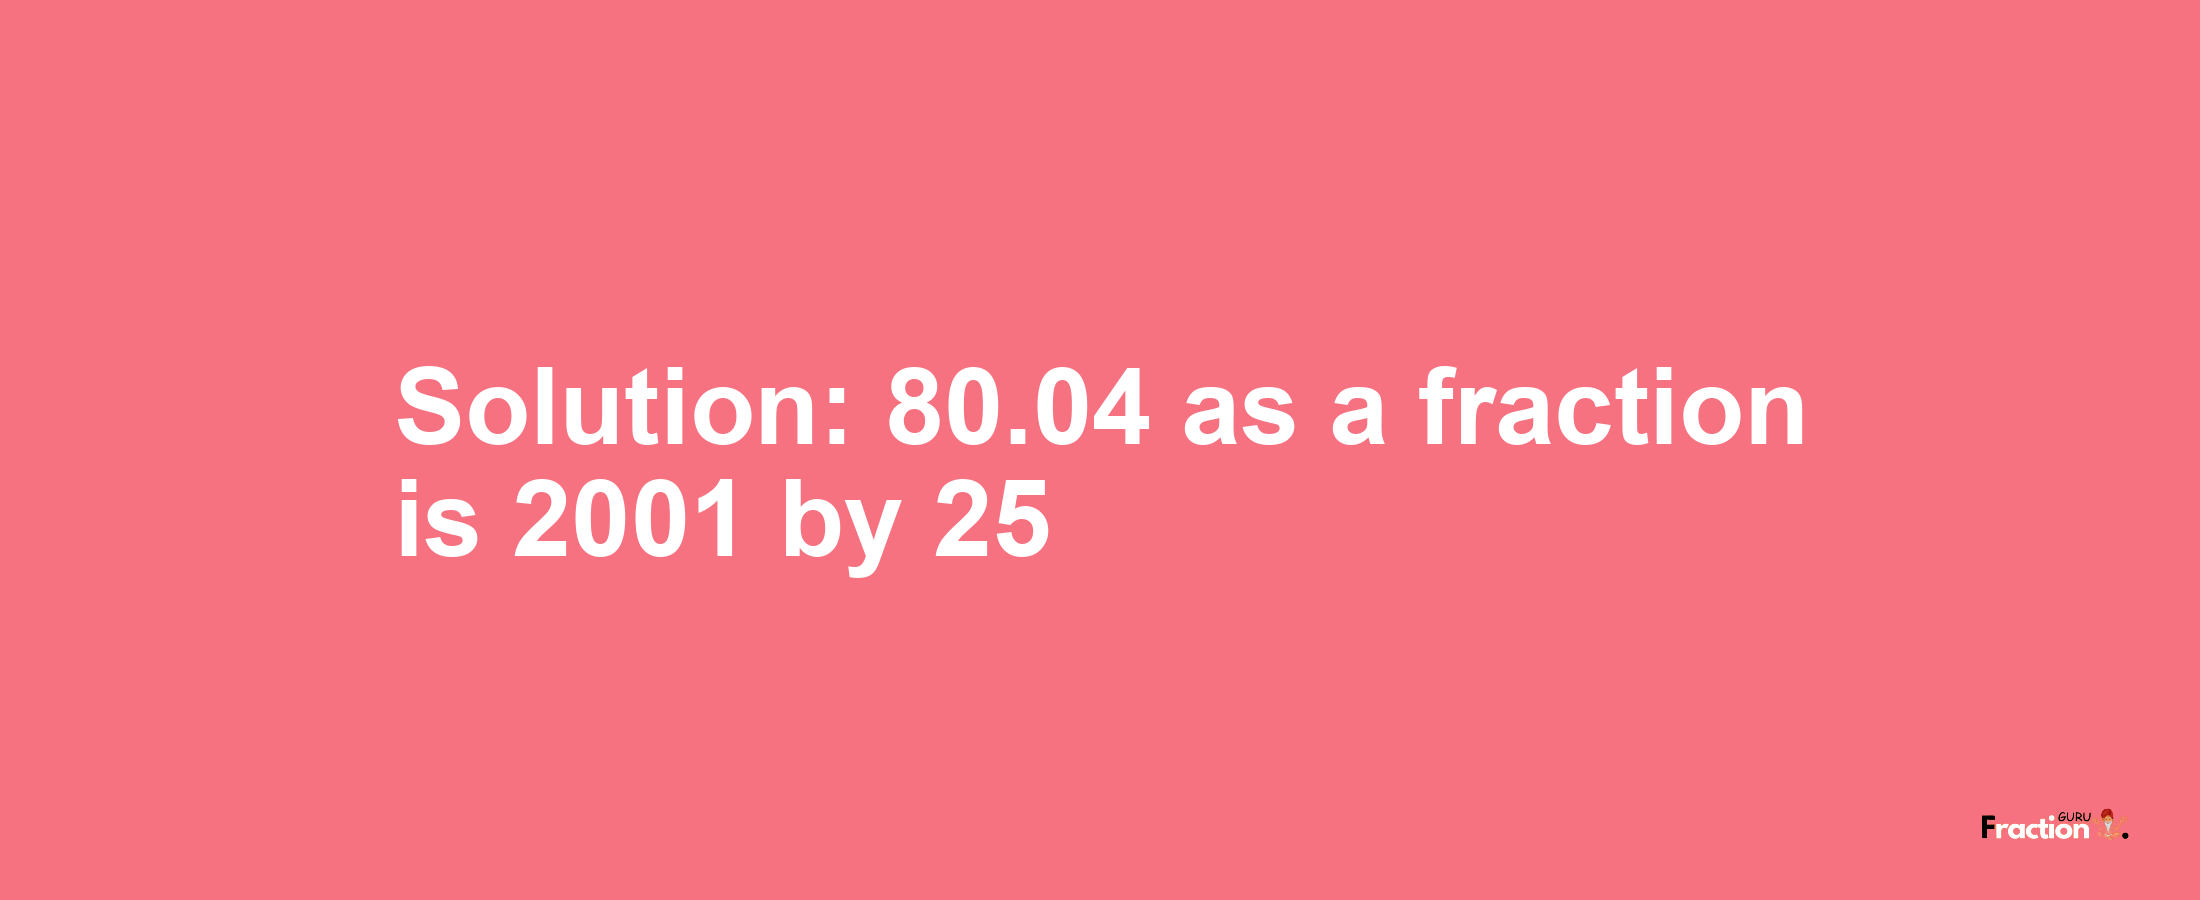 Solution:80.04 as a fraction is 2001/25